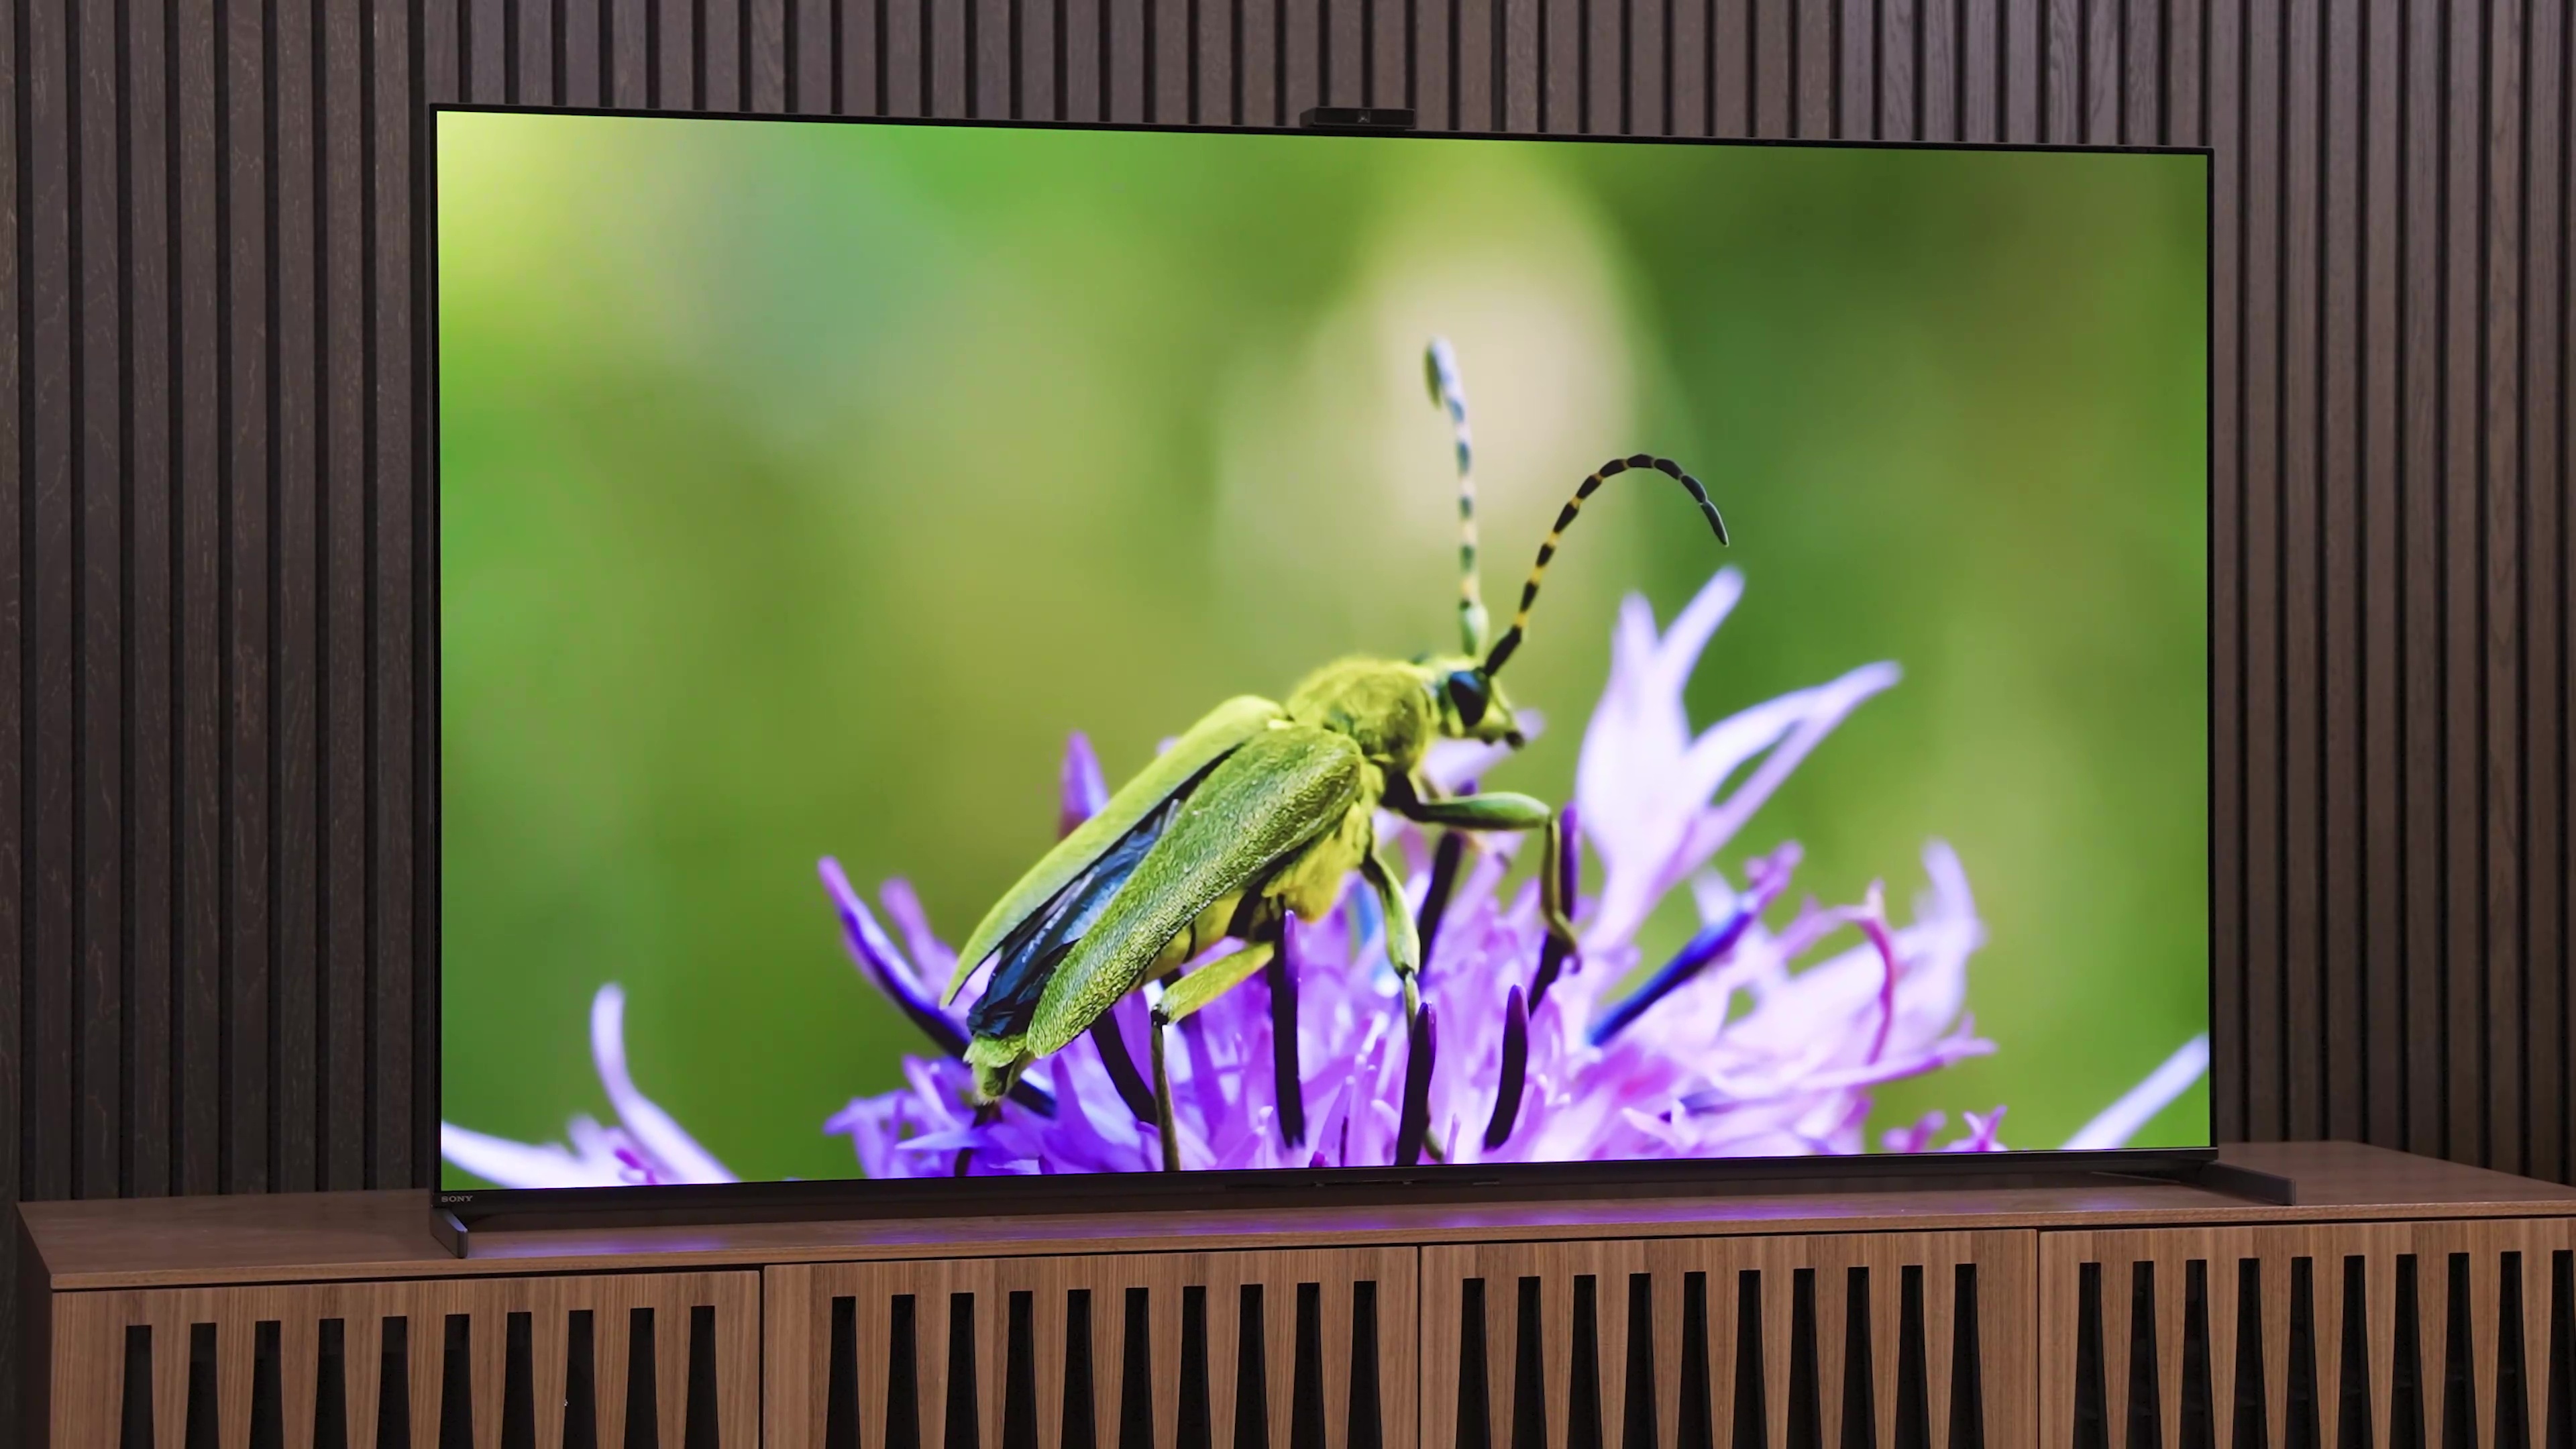 Sony BRAVIA A95L QD-OLED TV Review - A New Benchmark for OLED Displays